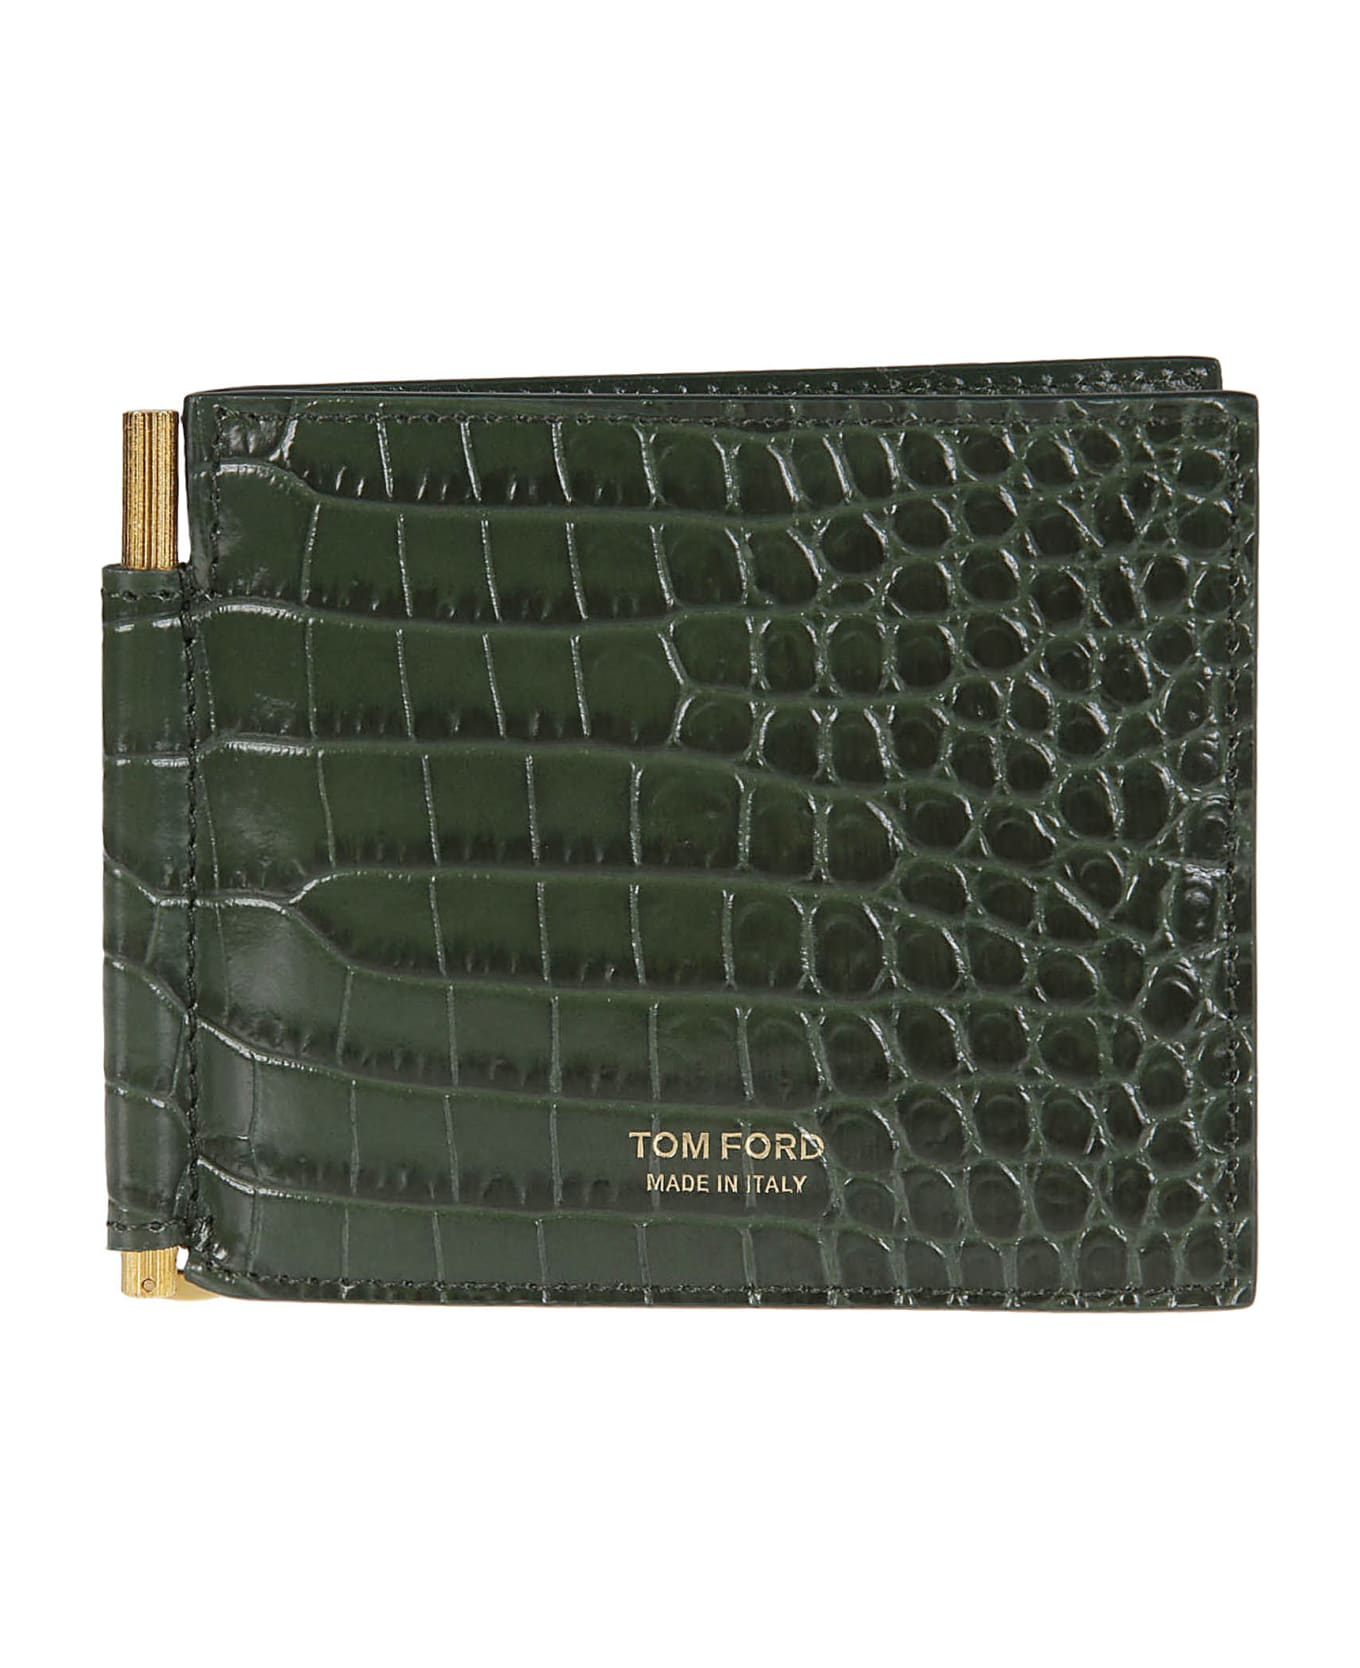 Tom Ford Printed Alligator Money Clip Wallet - Rifle Green